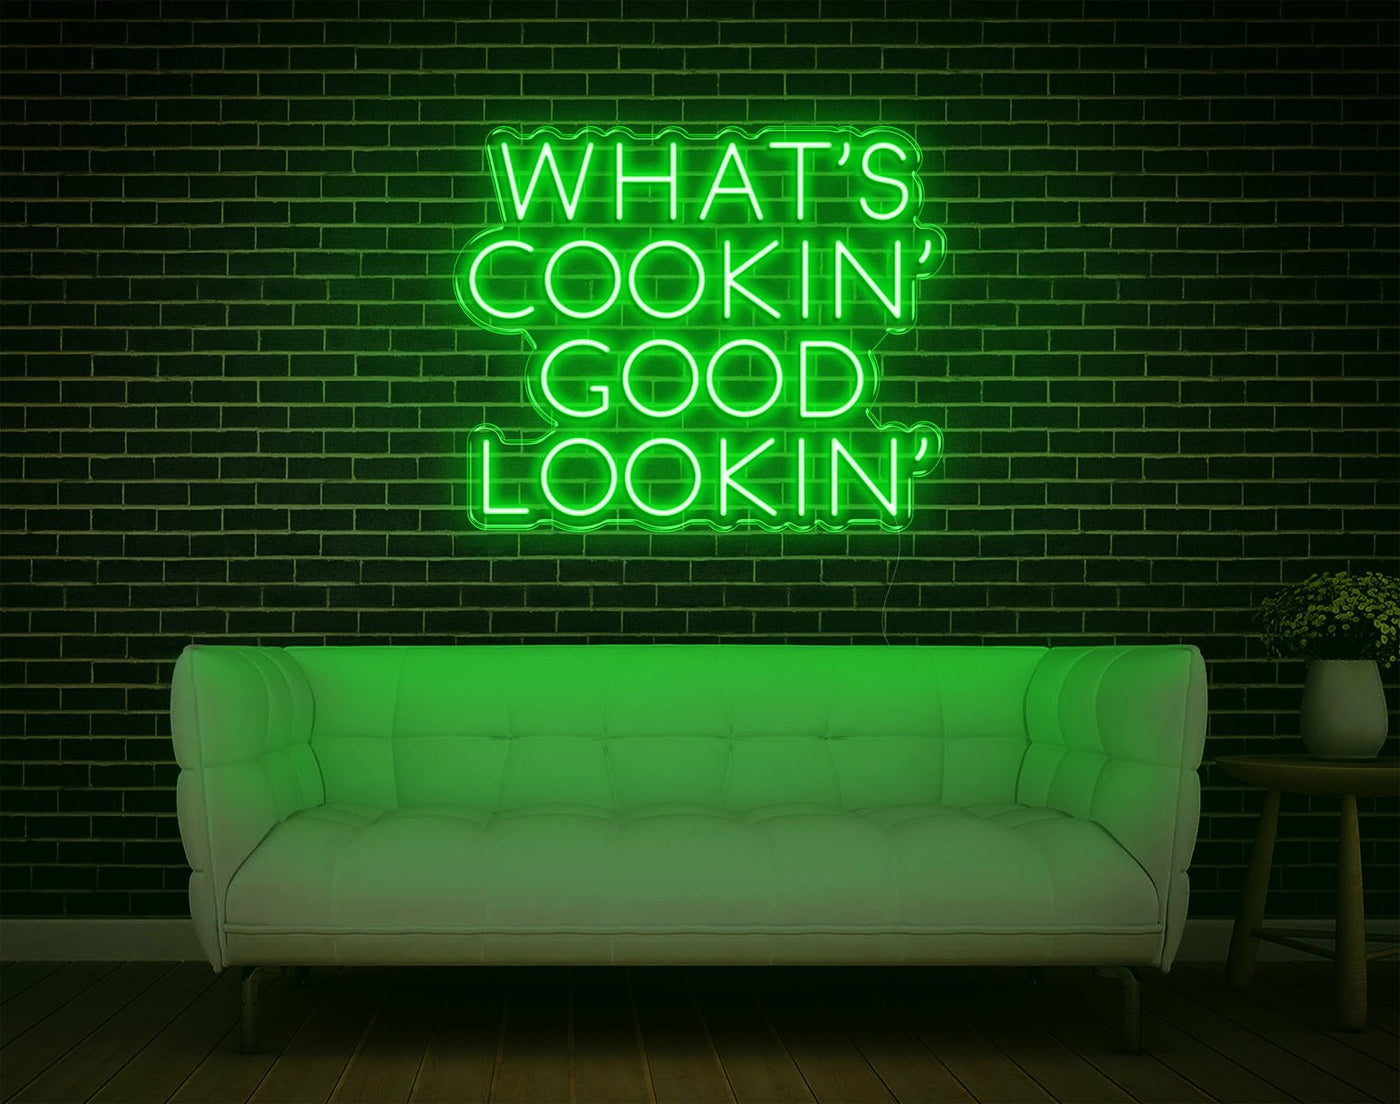 What's Cookin' Good Lookin' LED Neon Sign - 21inch x 25inchGreen